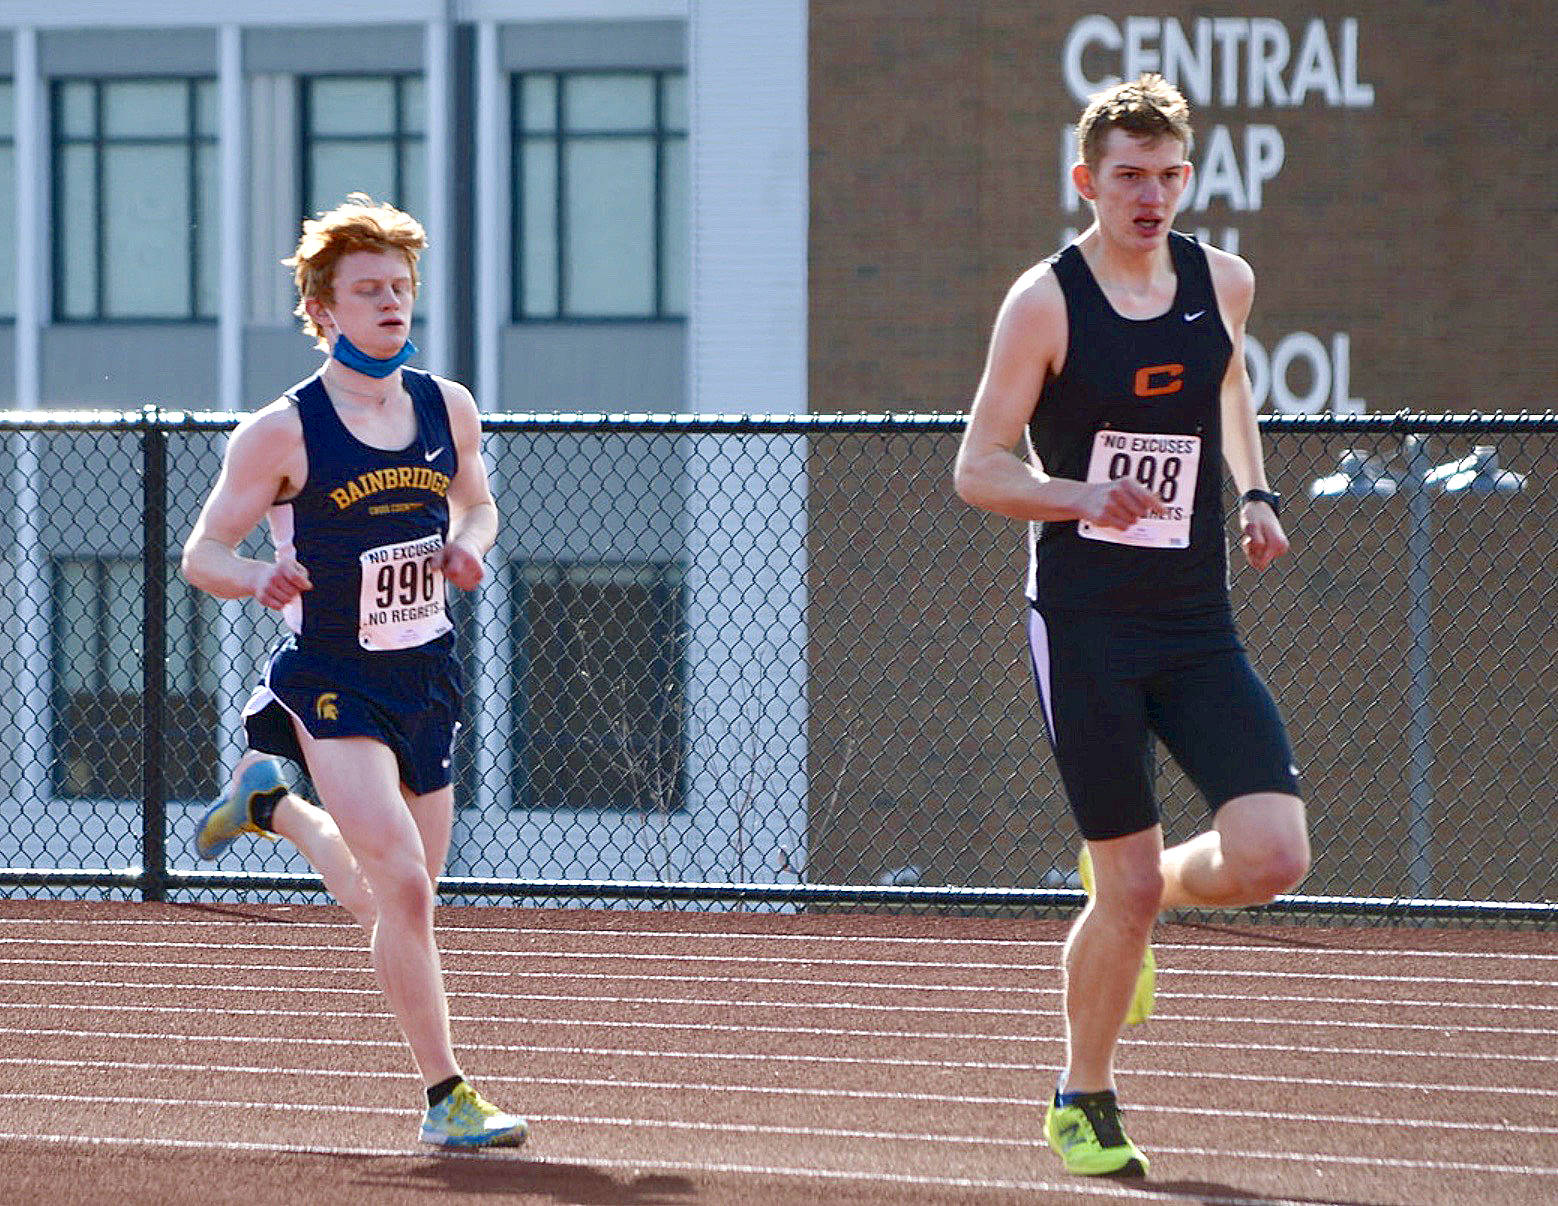 Bainbridge’s Alex Miller chases down Central Kitsap’s Daniel Lizon in the second Olympic League meet of the season. Miller won the race with a time of 17:20.20. (Photo courtesy of Rick Peters)